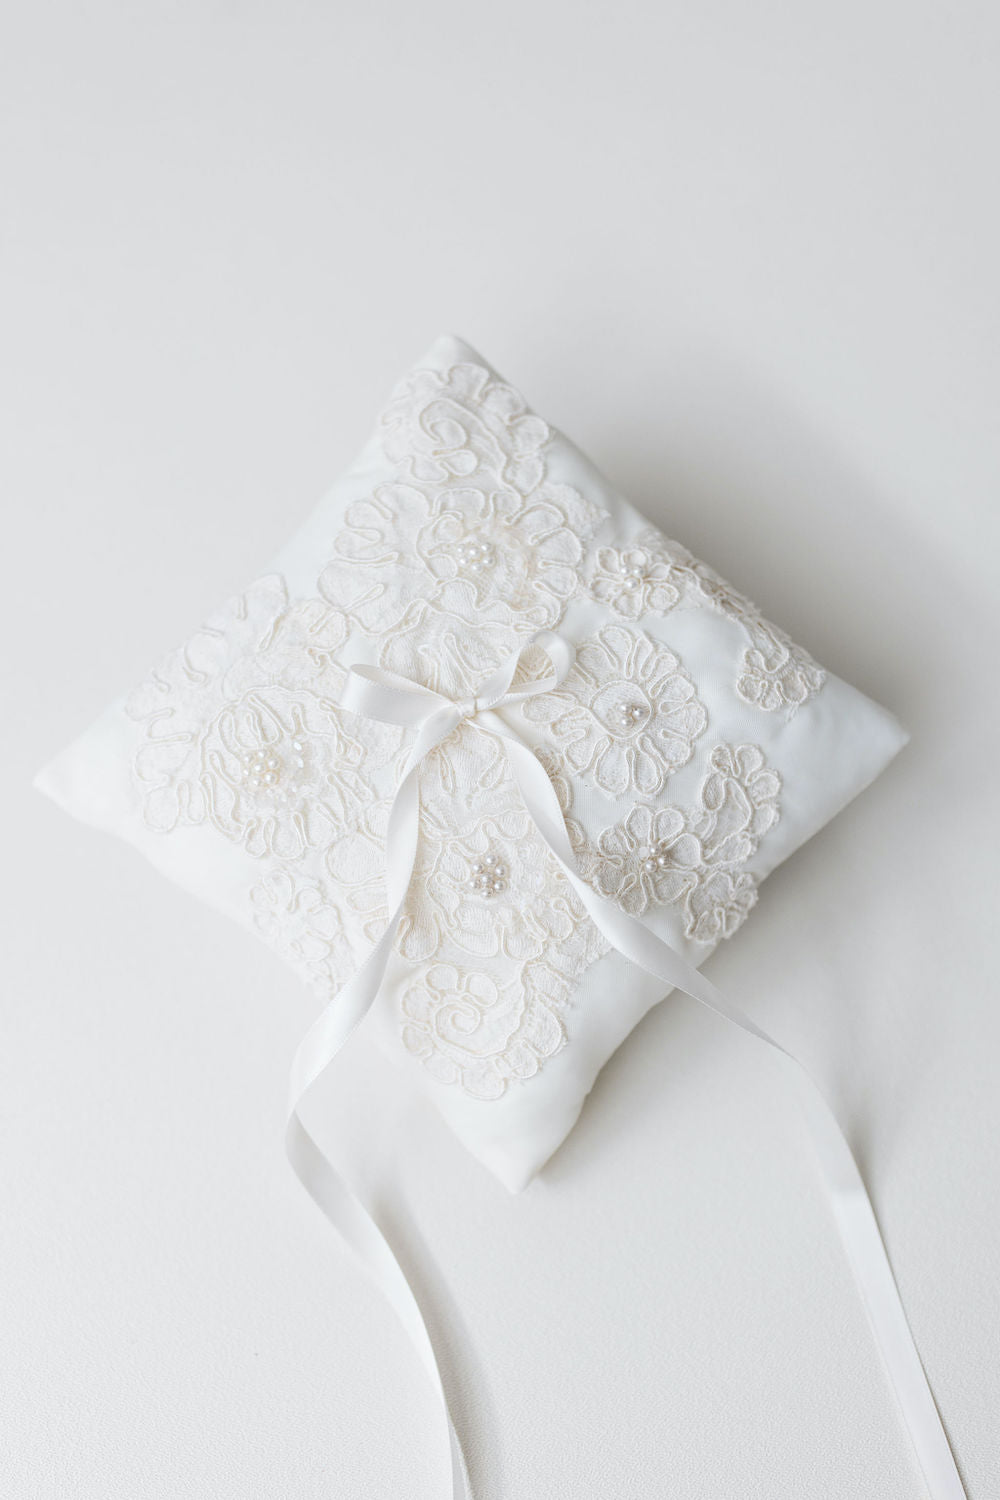 ring bearer pillow in ivory from lace in mom's wedding dress handmade by The Garter Girl